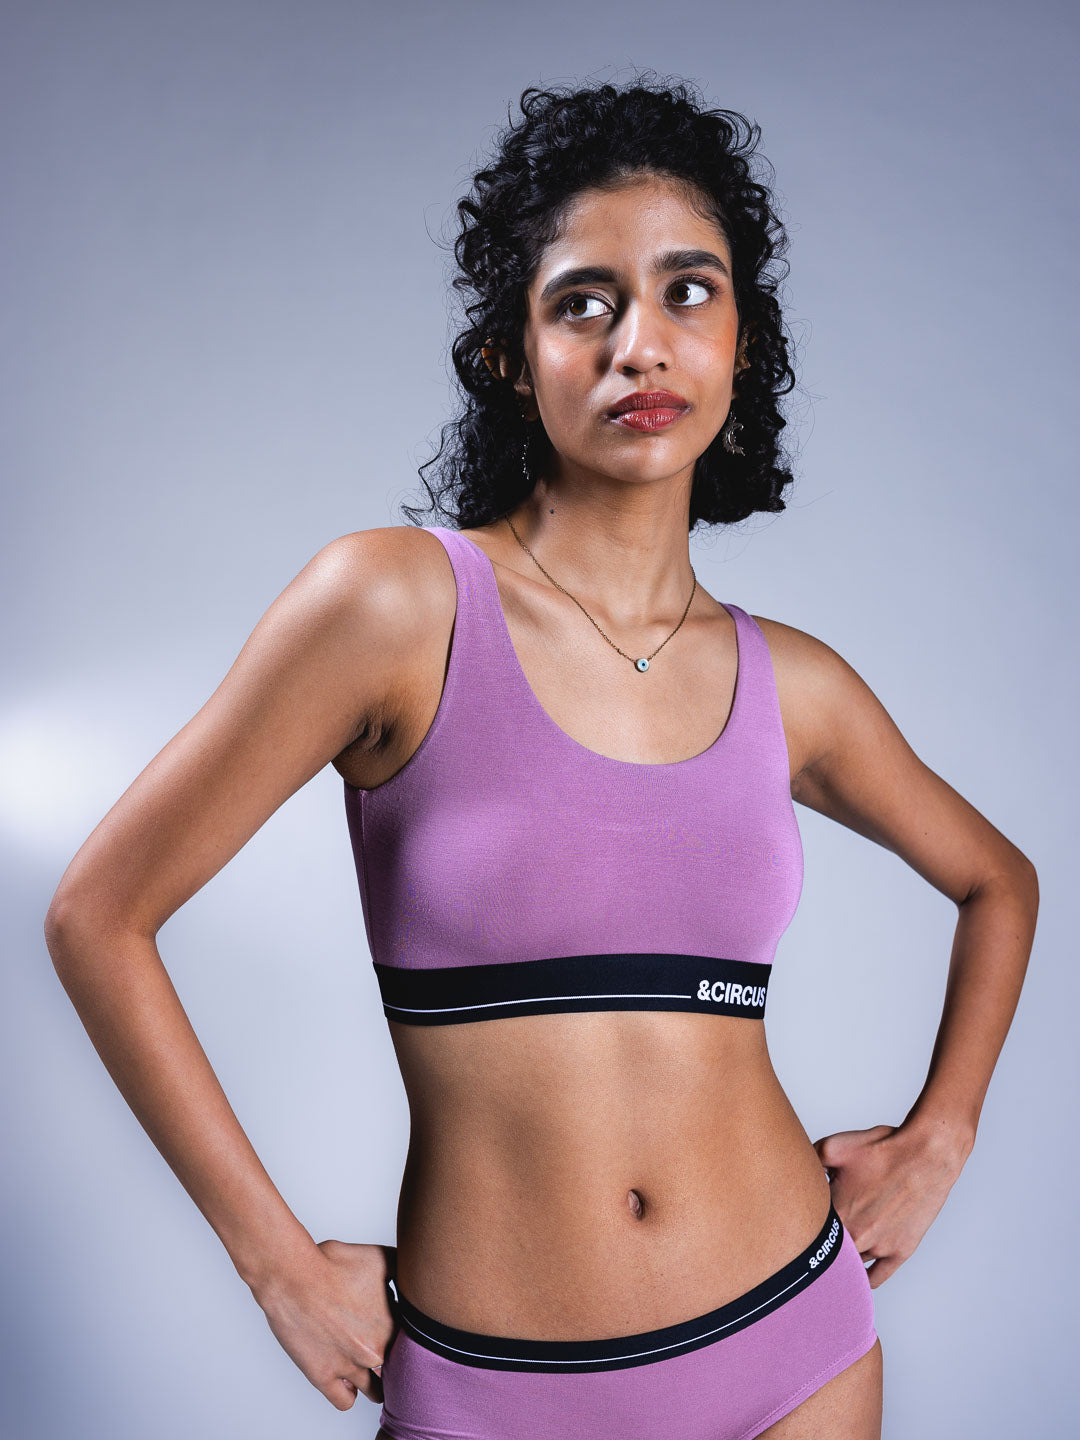 What is a sports bra like? Do I have to wear a sports bra while exercising?  - Quora